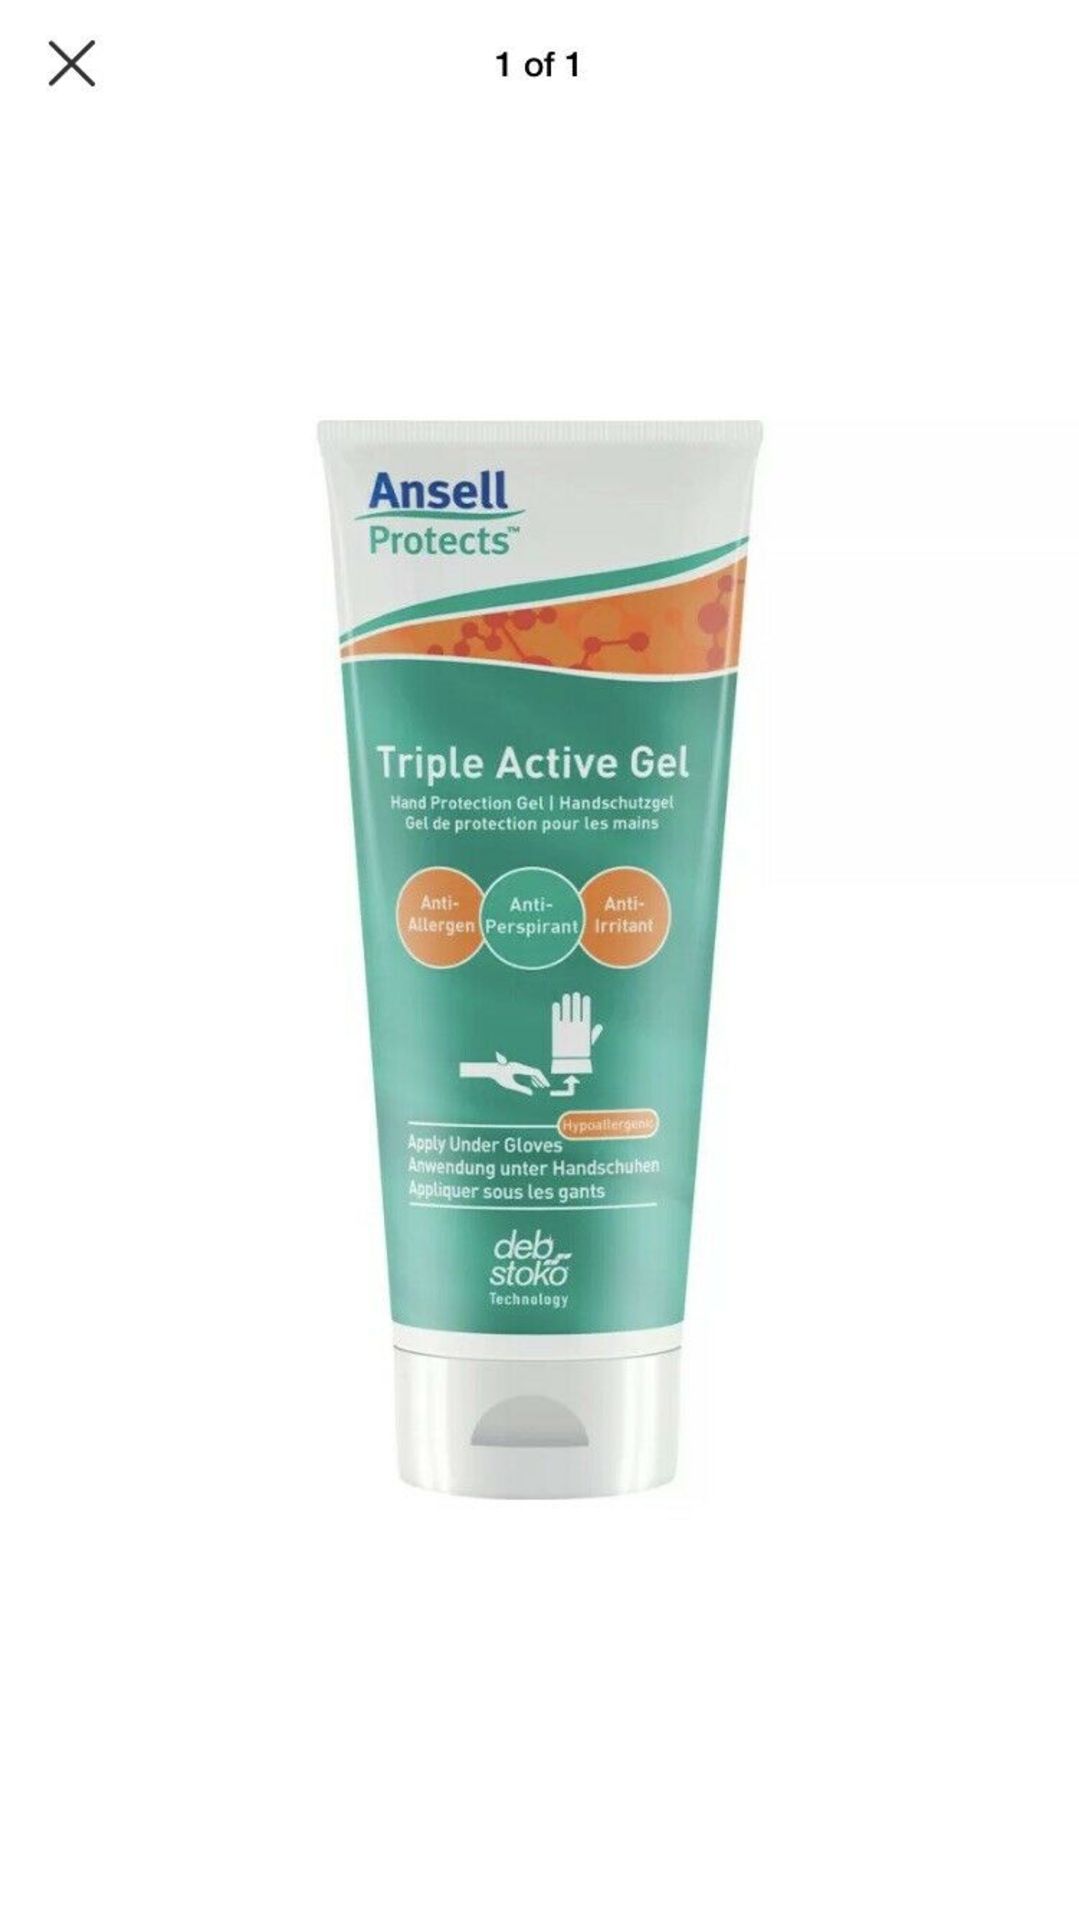 500pcs --in lot - 30ml size - Brand new and Sealed Ansell Products Triple Active Gel - Hand health